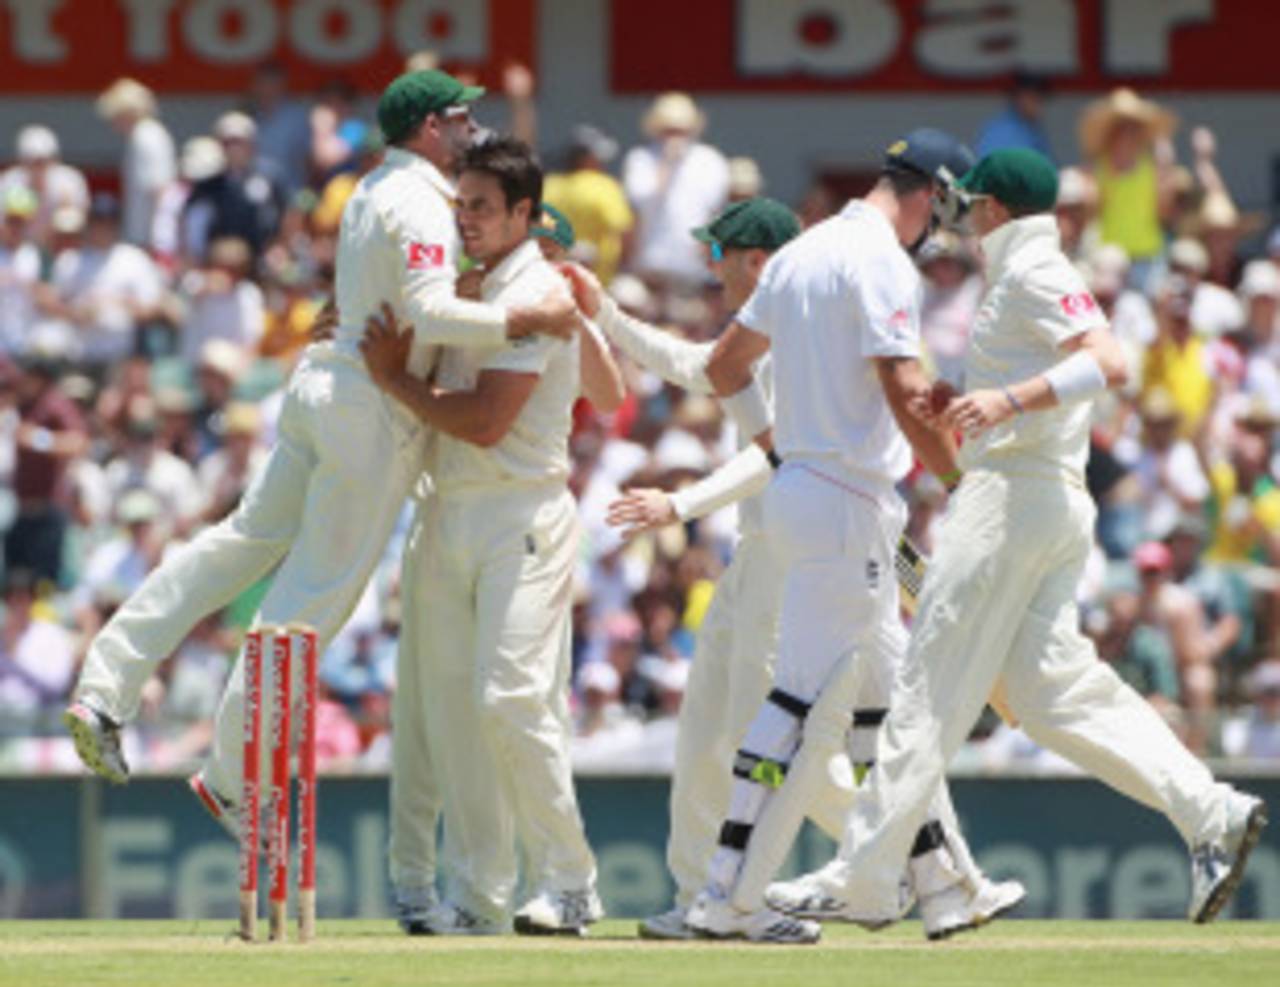 Kevin Pietersen fell for a duck against a fired-up Mitchell Johnson, Australia v England, 3rd Test, Perth, 2nd day, December 17, 2010